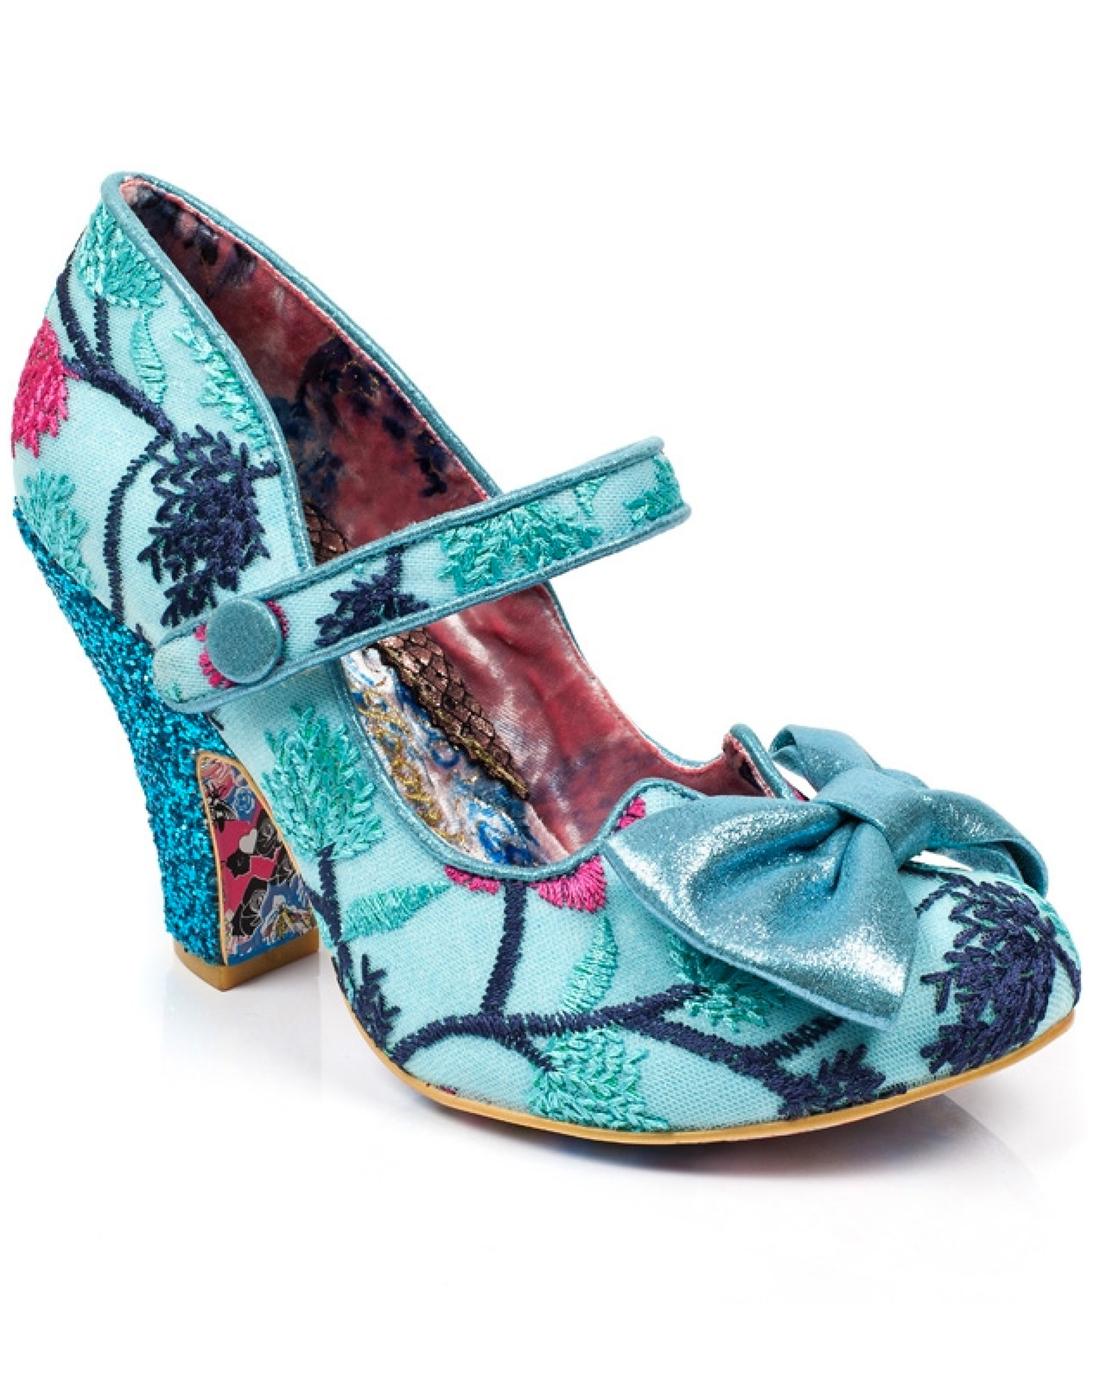 IRREGULAR CHOICE Fancy This Retro Floral Heels in Blue